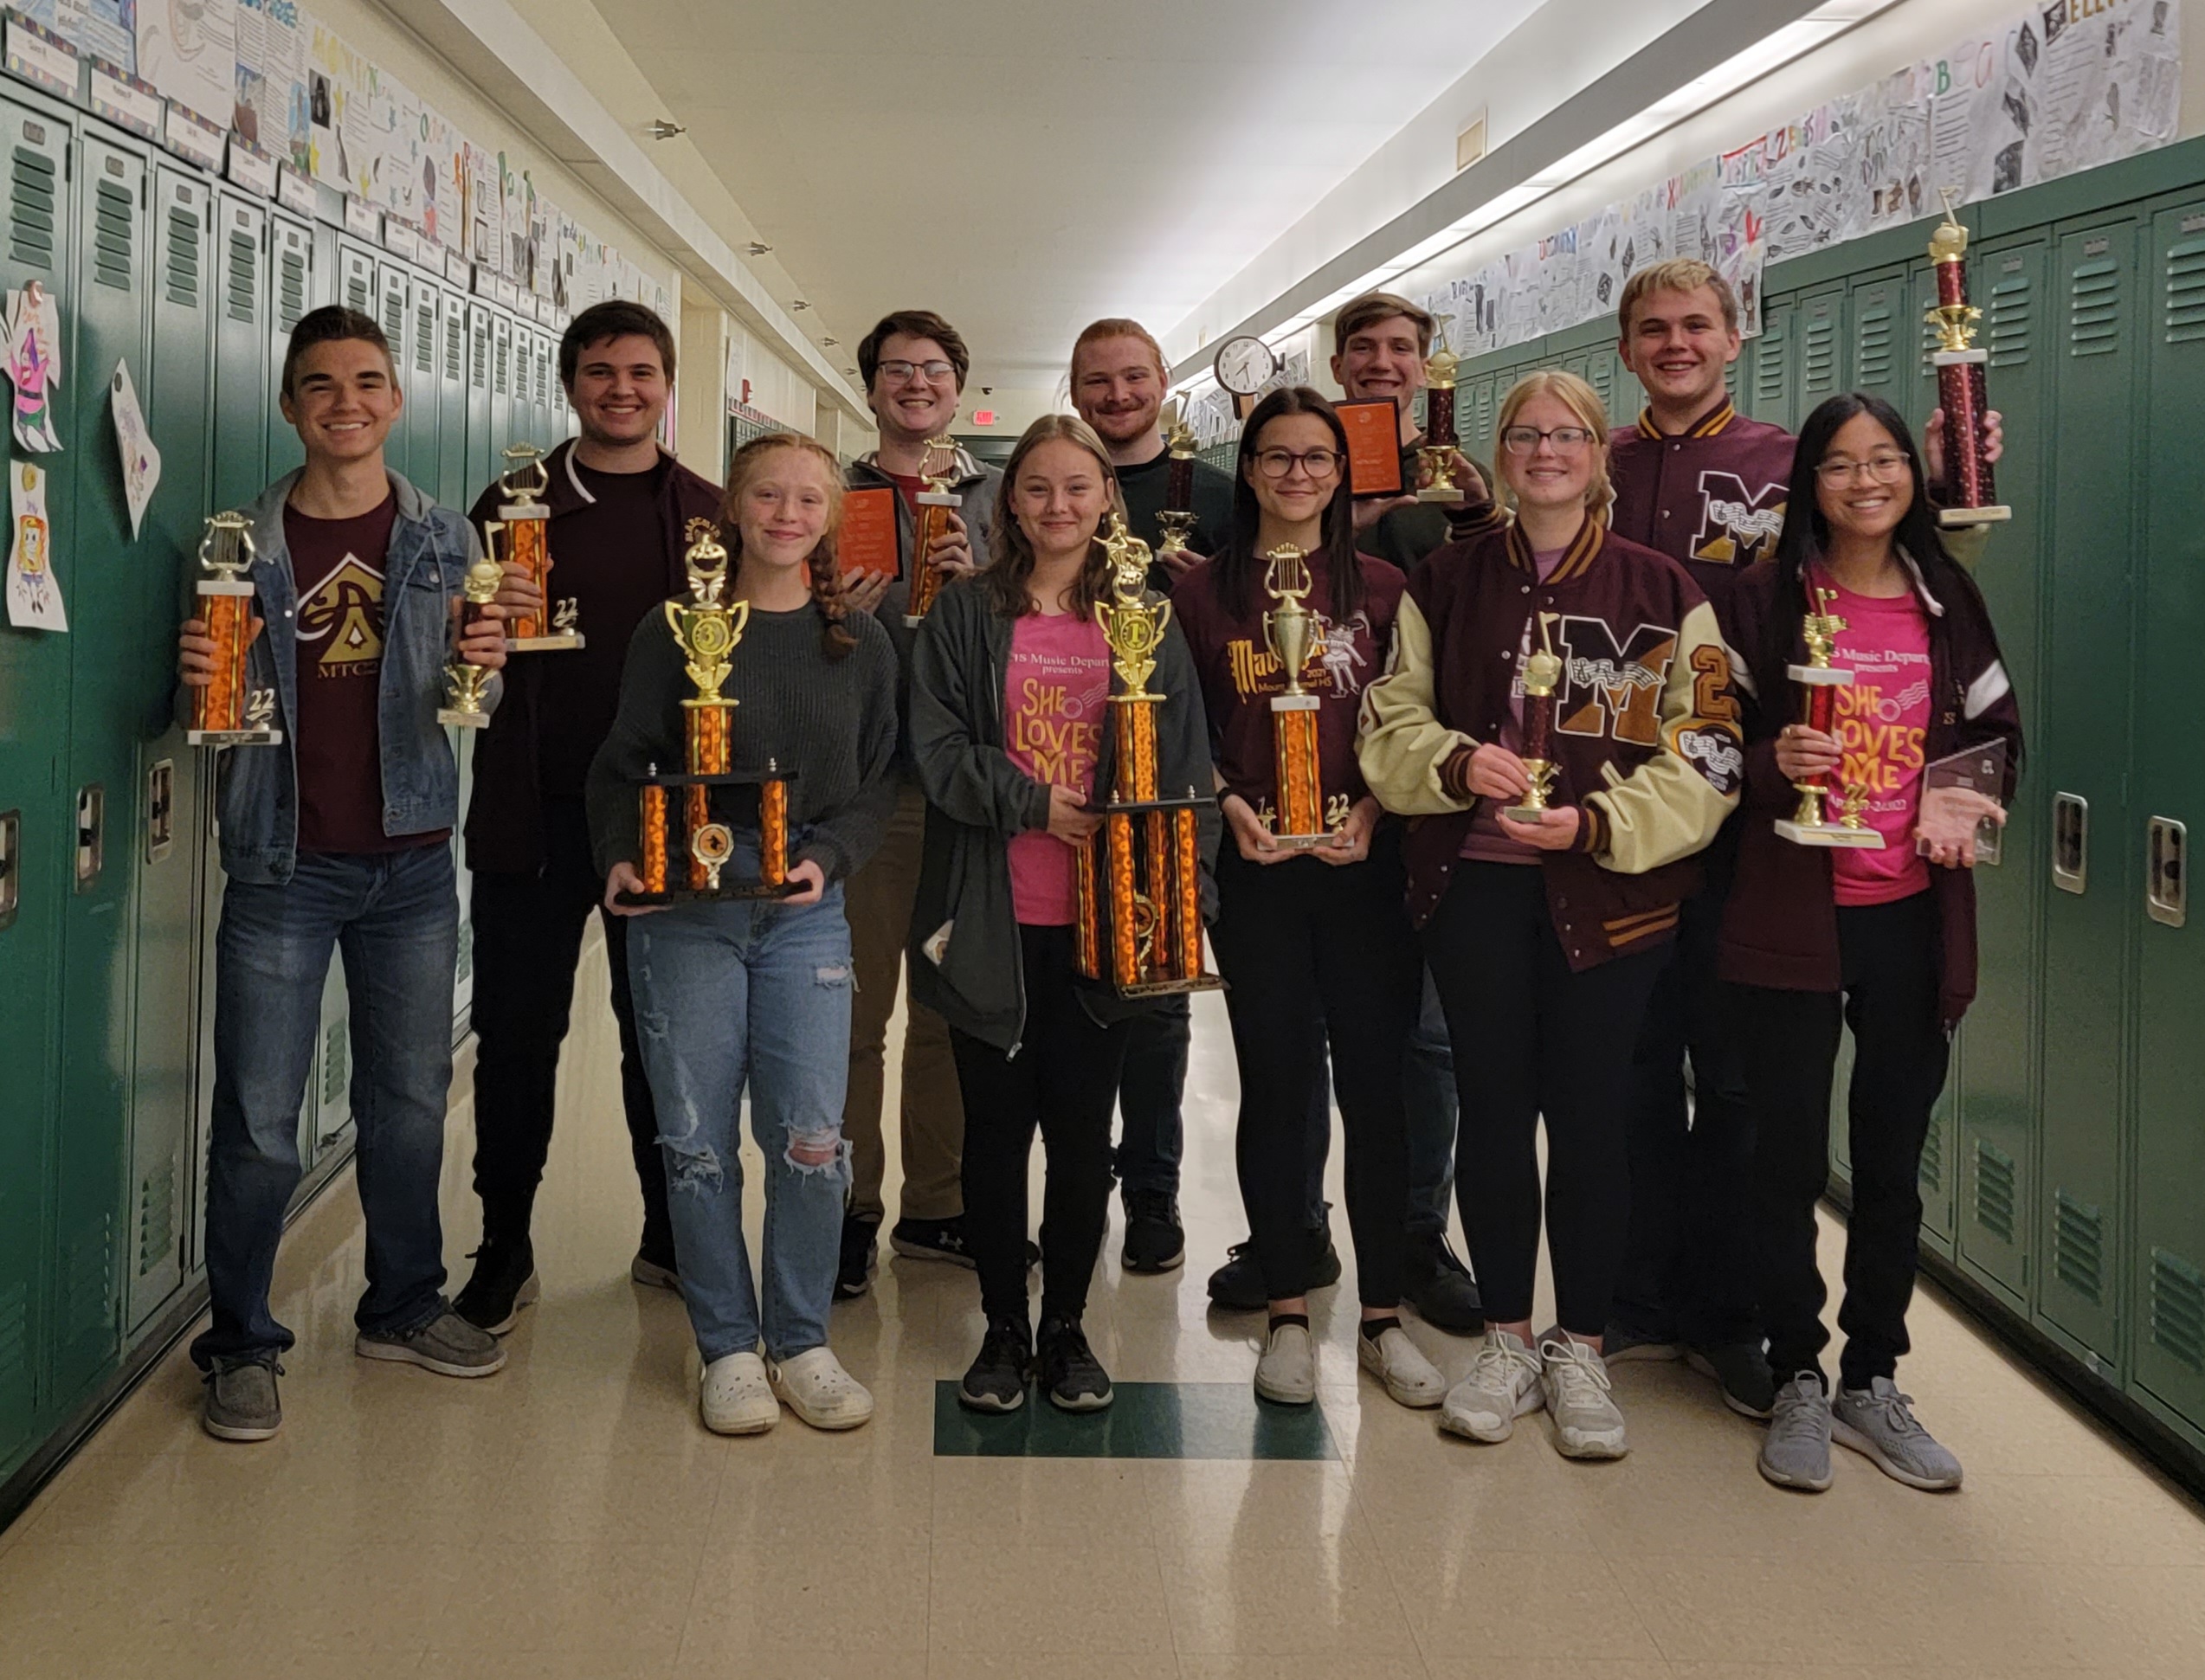 Senior Band Kids with trophies from the season